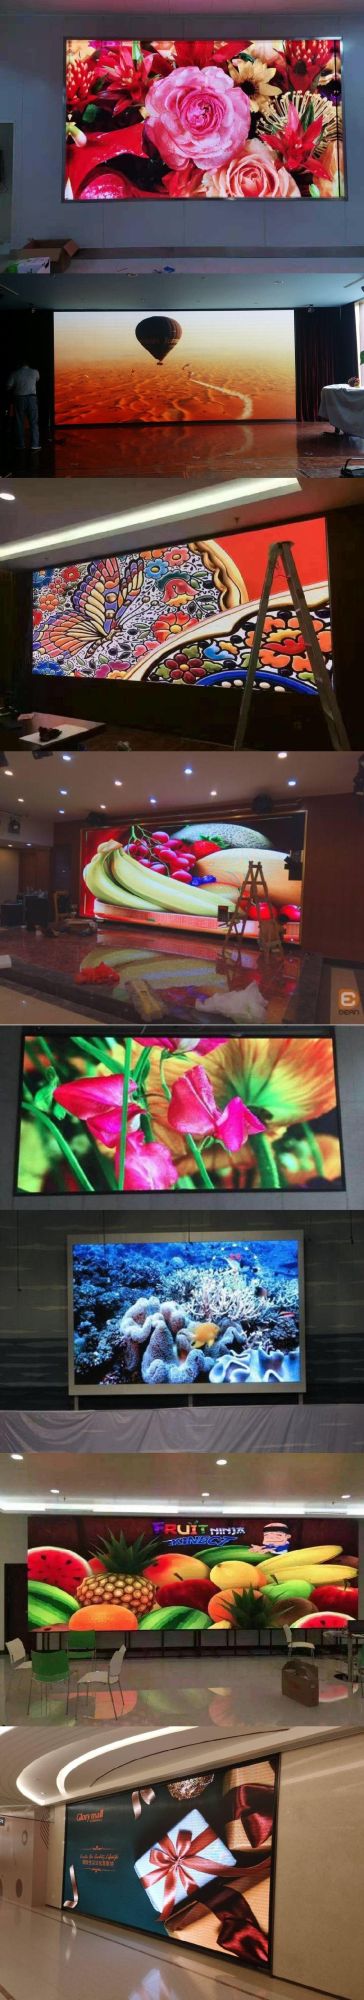 300mm*168.75mm RoHS Approved Fws Cardboard, Wooden Carton, Flight Case LED Video Display